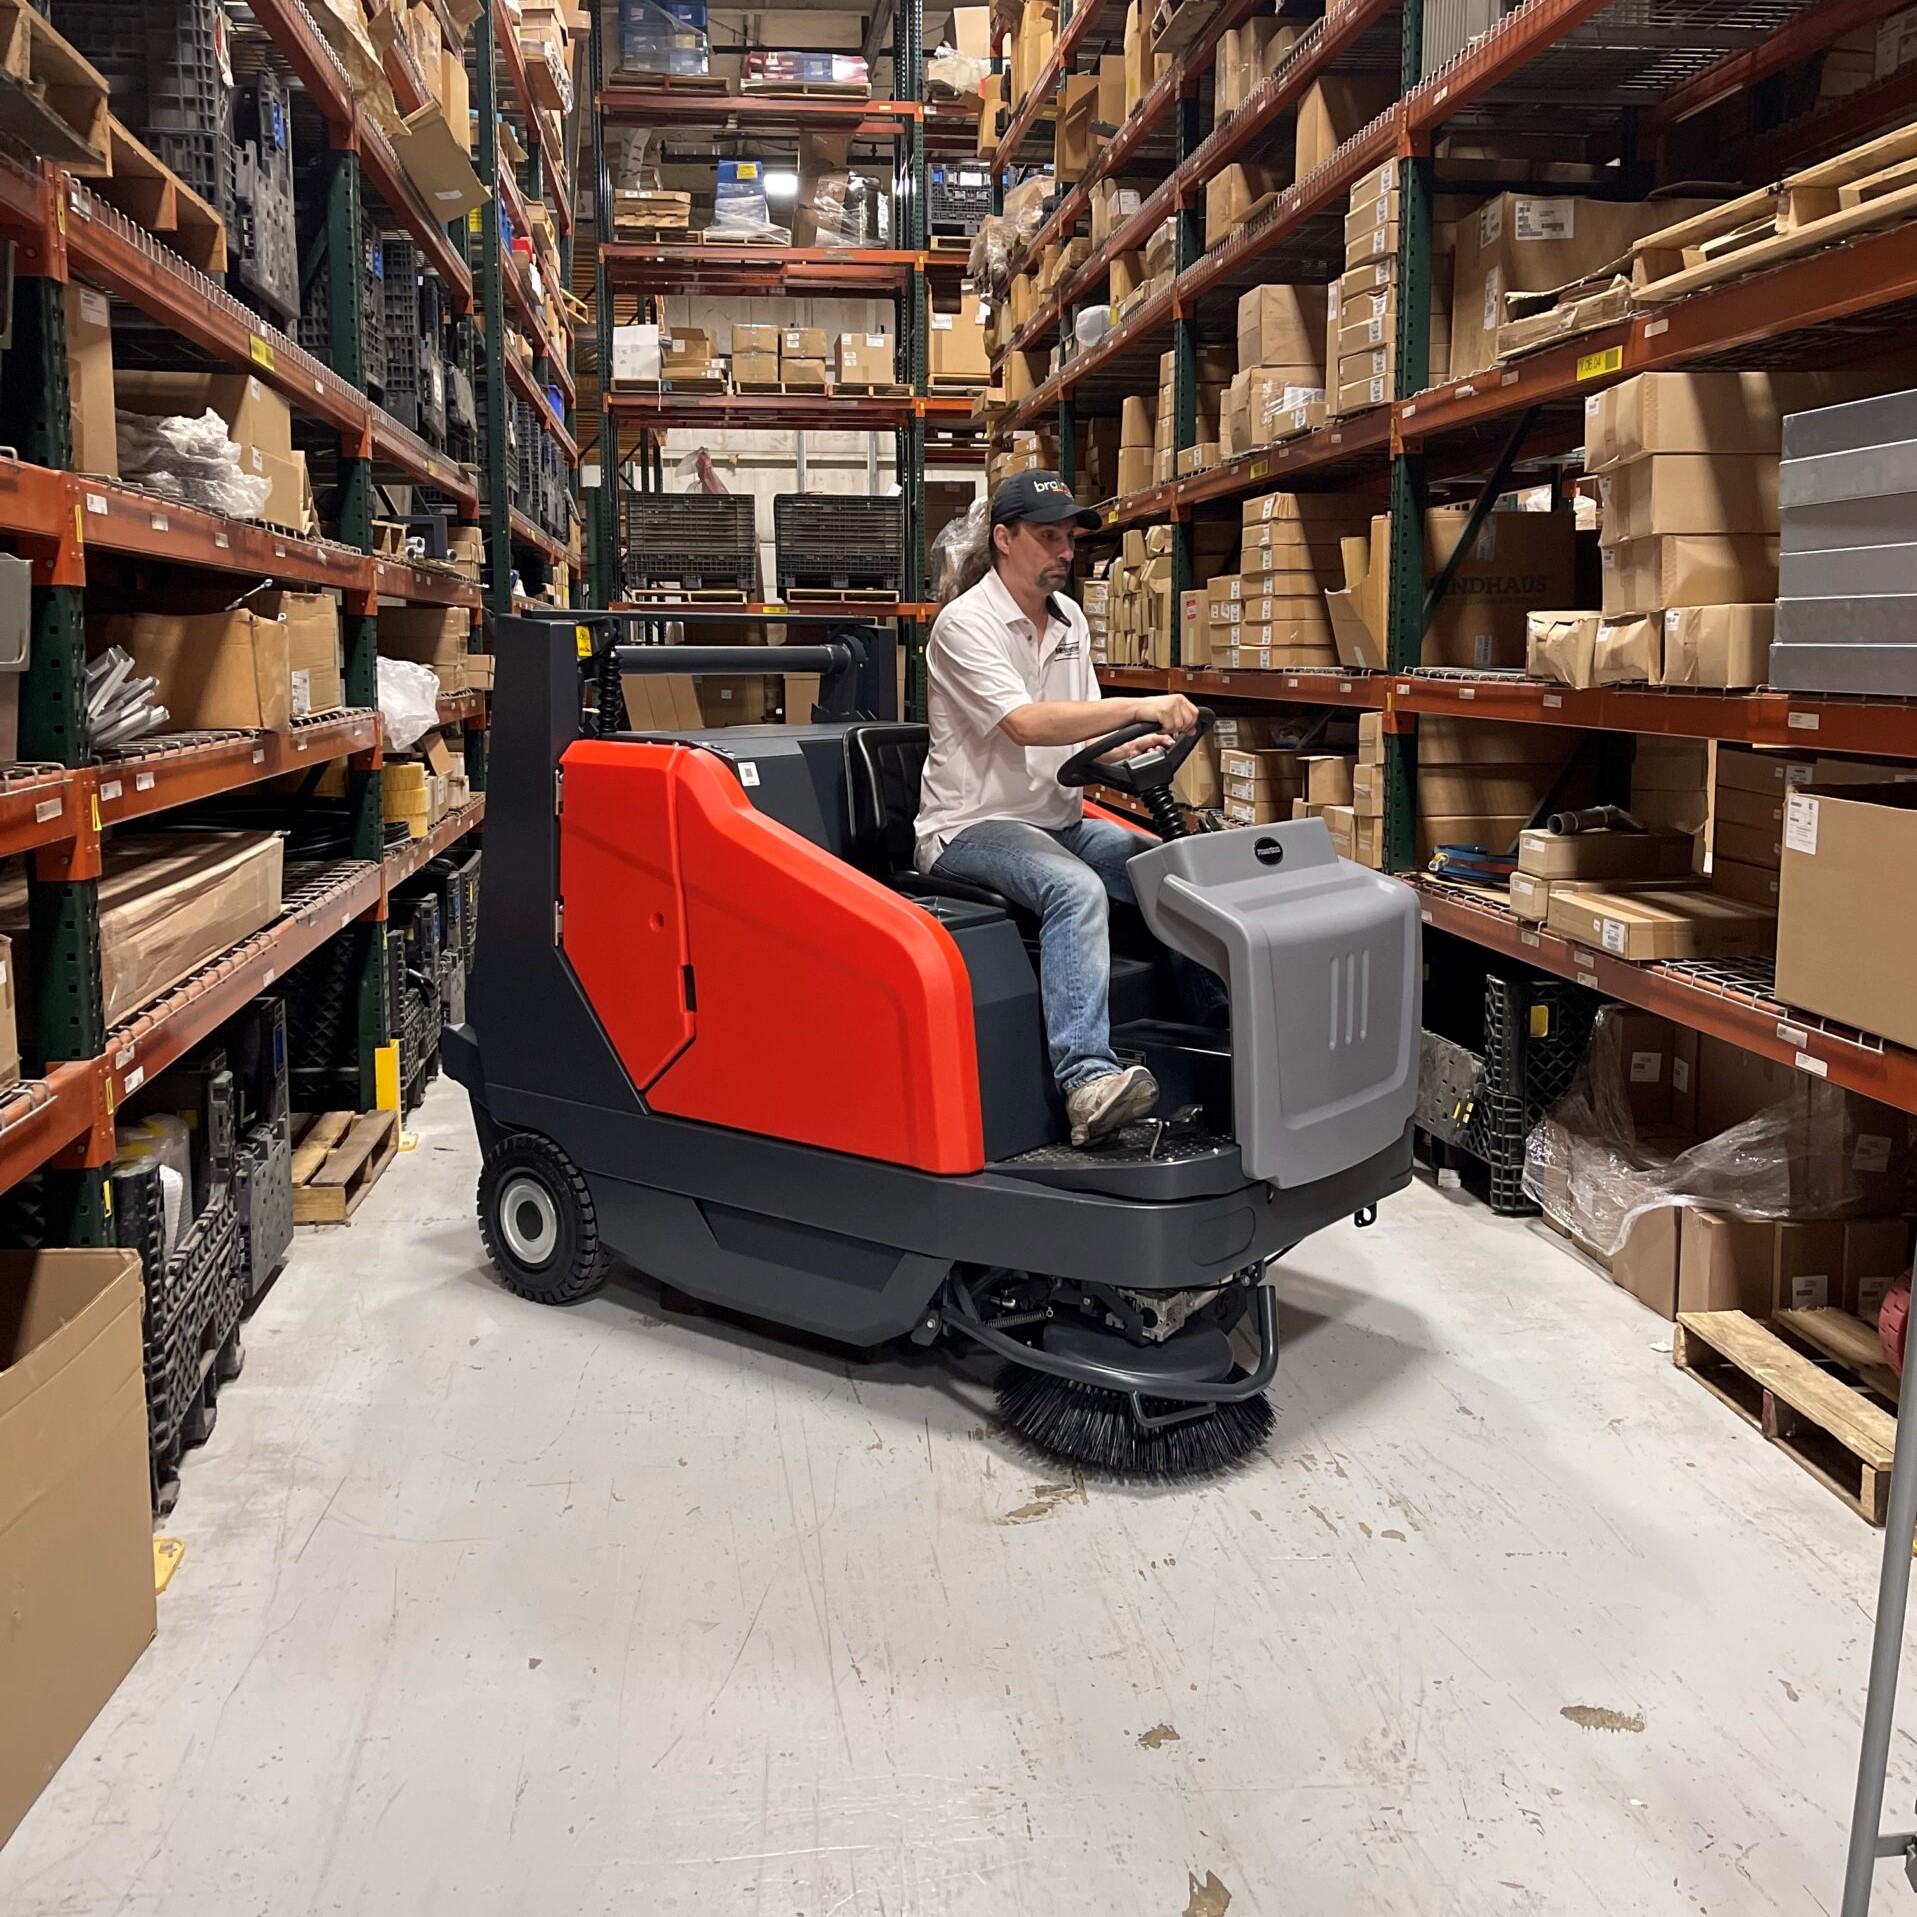 PowerBoss Sweepmaster 1500RH turning in a warehouse aisle